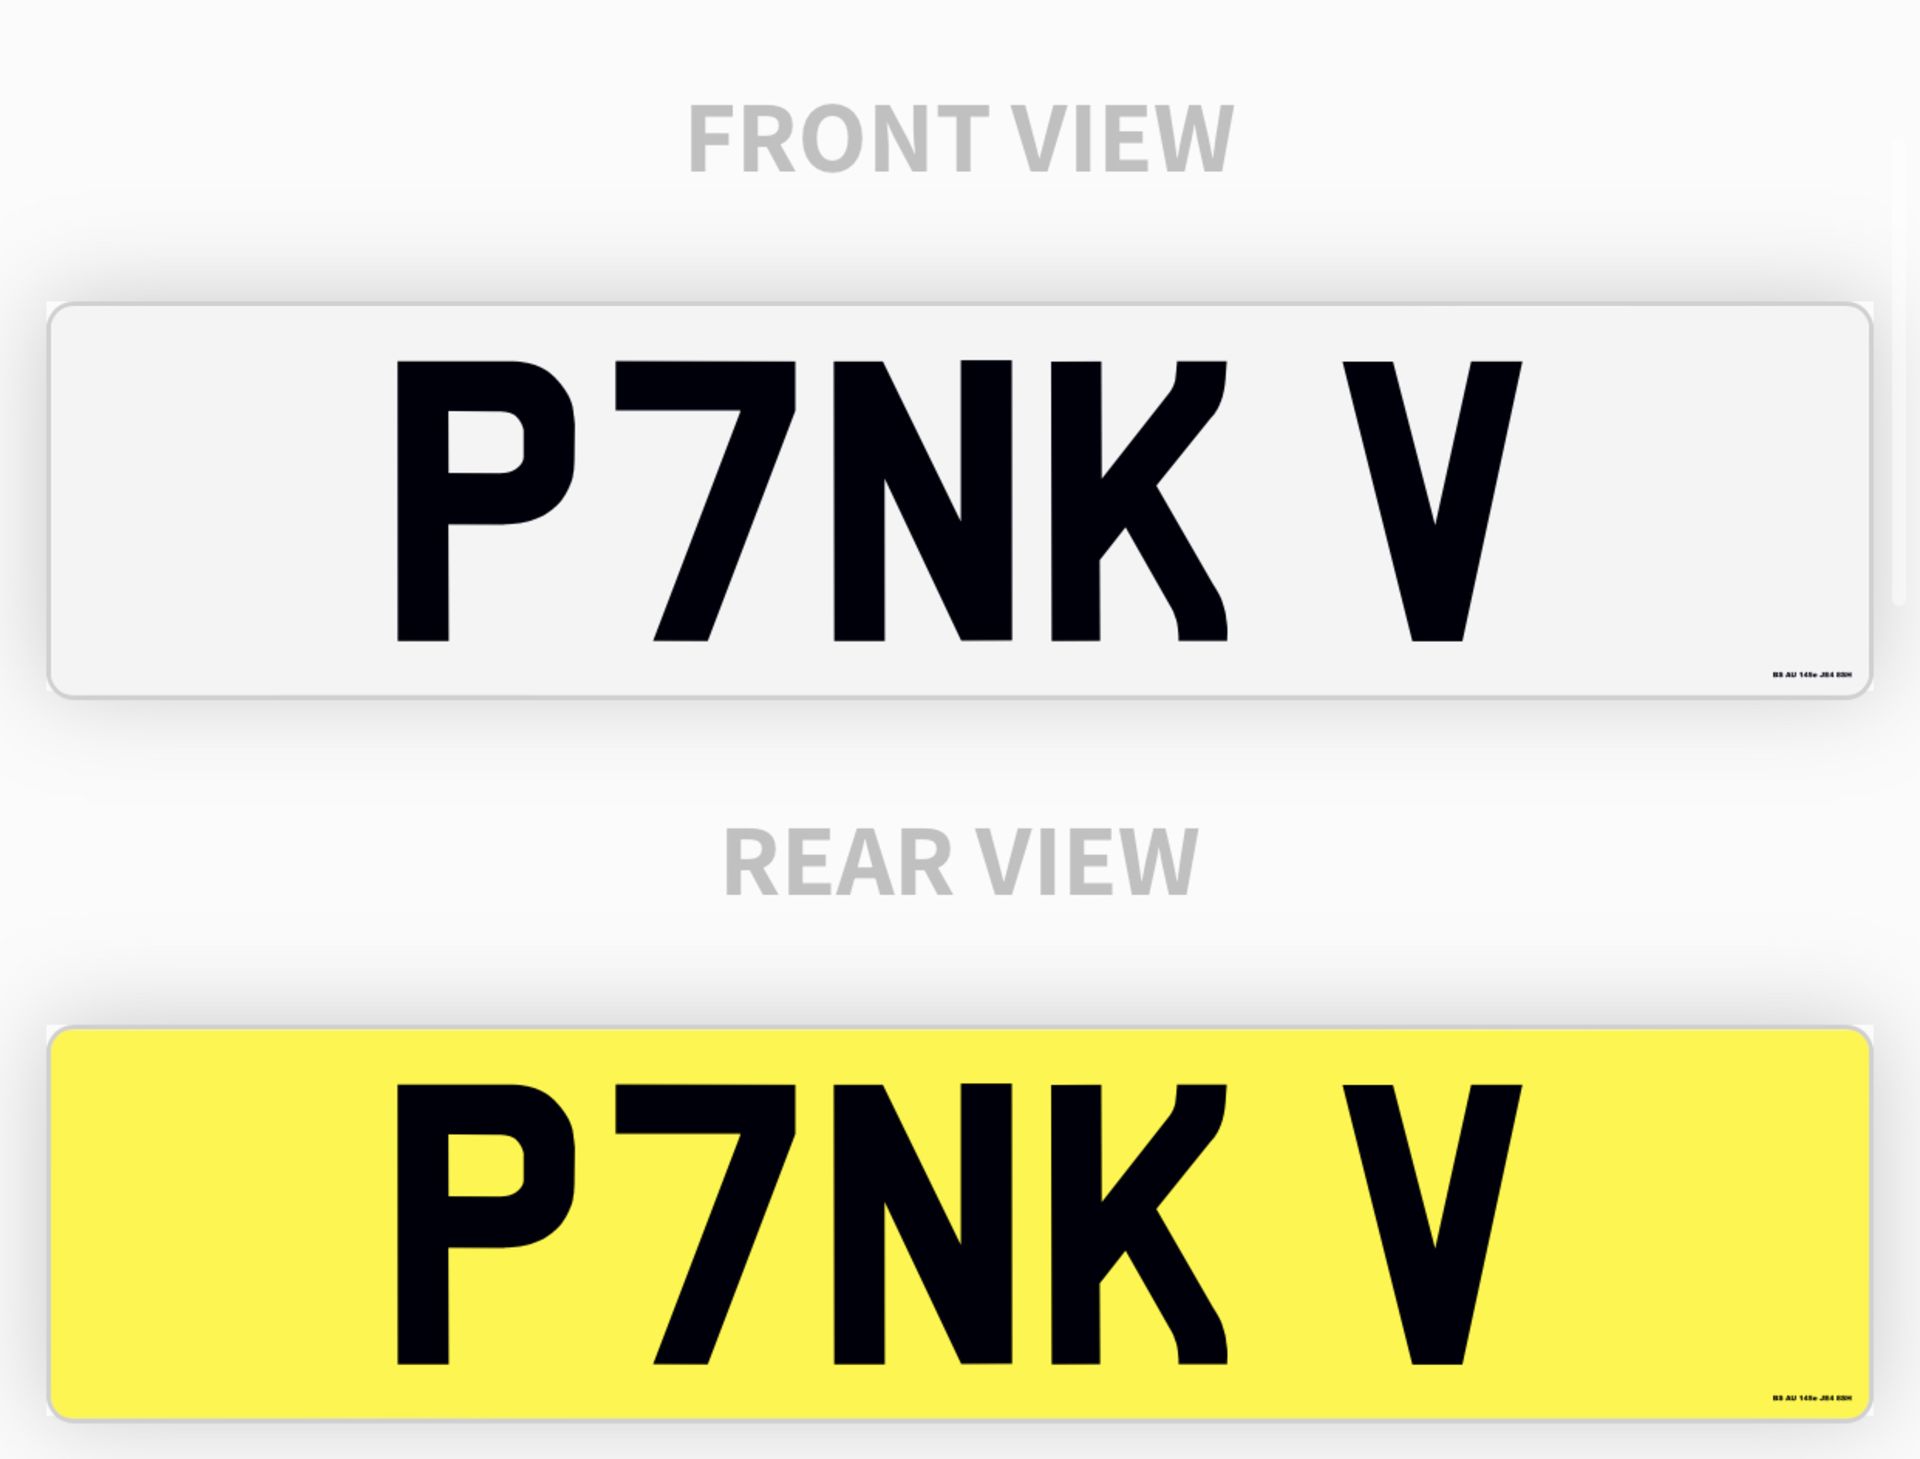 "P7NK V", 'PINK', PRIVATE NUMBER PLATE, CURRENTLY ON RETENTION *NO VAT*